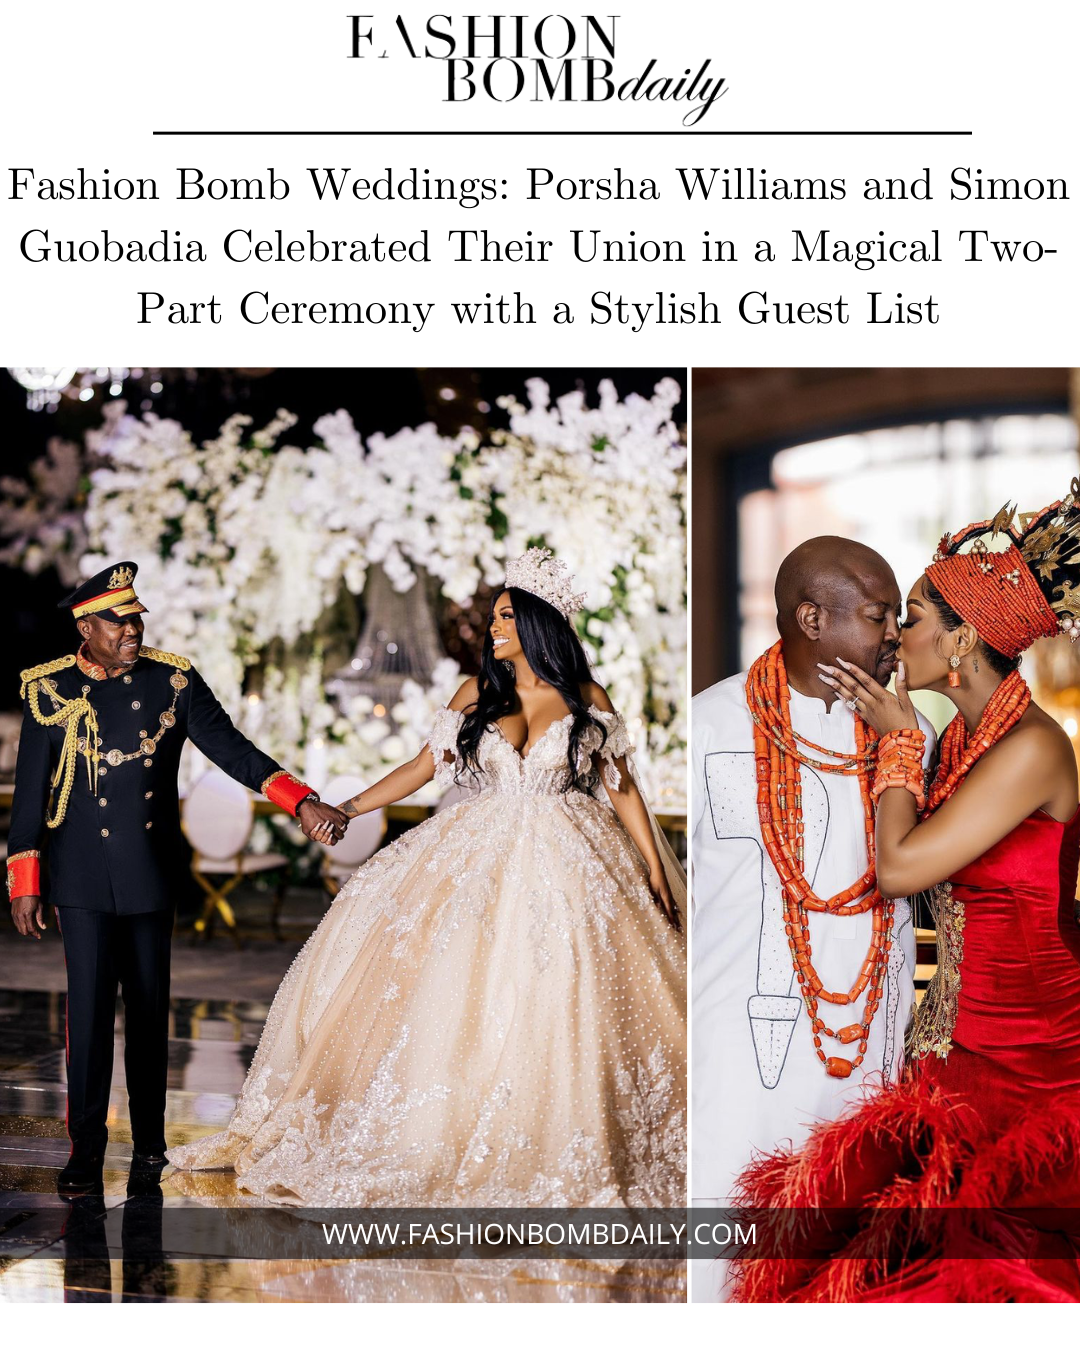 Fashion Bomb Weddings Porsha Williams and Simon Guobadia Celebrated Their Union in a Magical Two Part Ceremony with a Stylish Guest List